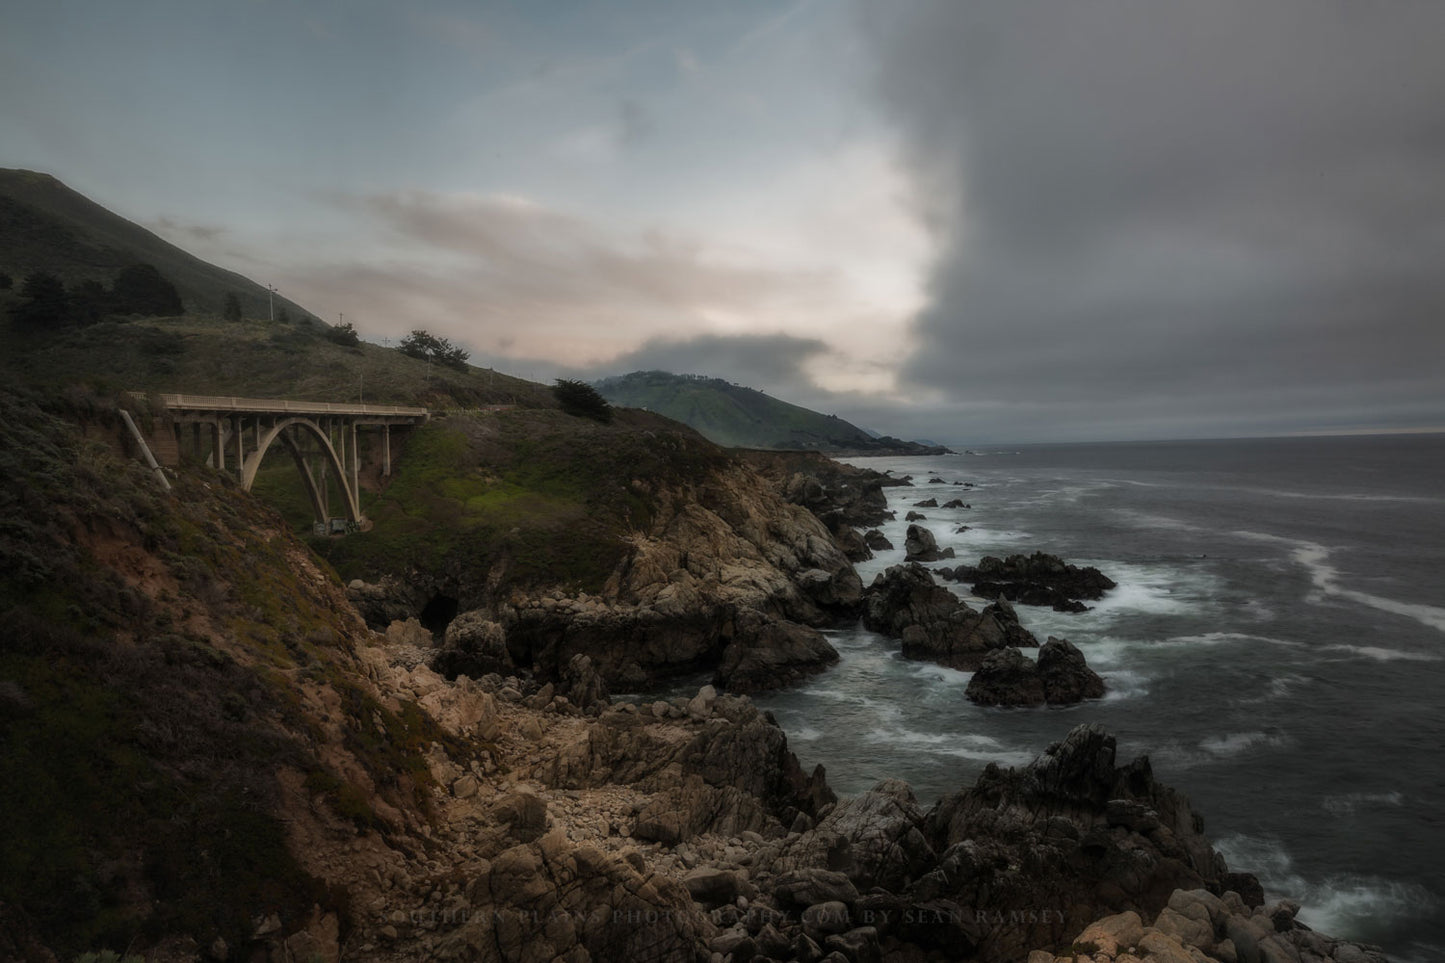 Coastal photography print of fog rolling in to Bixby Bridge along Highway 1 on the Pacific Coast near Big Sur, California by Sean Ramsey of Southern Plains Photography.